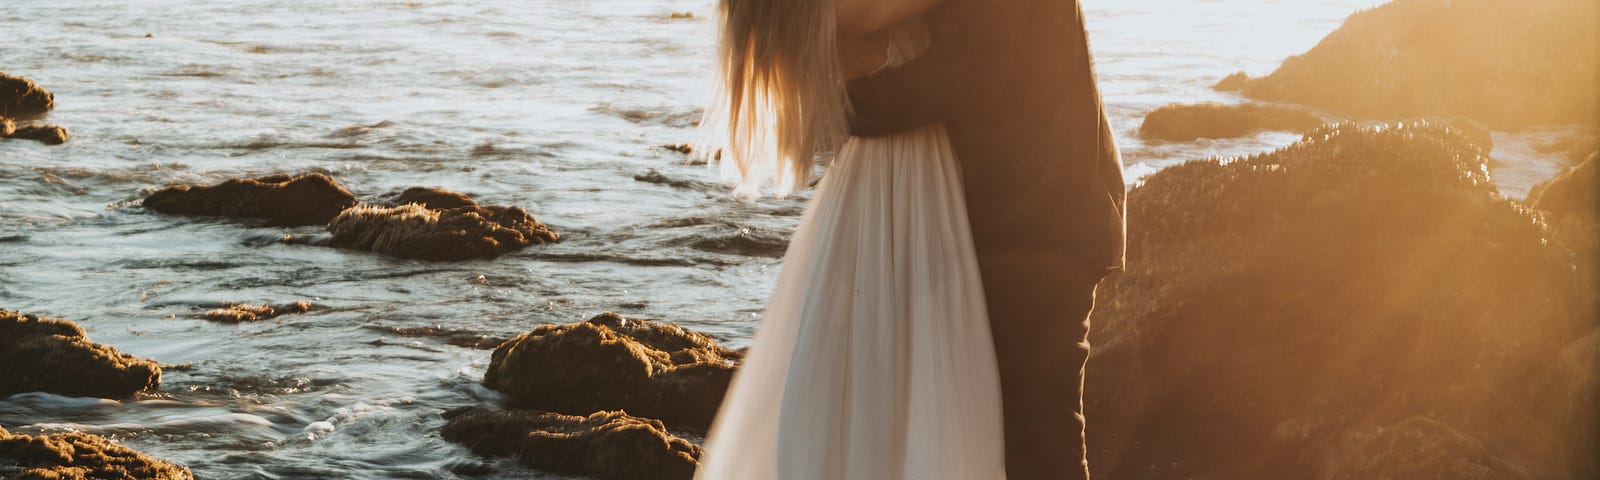 A tall man romantically clasps in his arms a long-haired woman in a flowing white dress. They’re kissing while standing on a rock on the beach, surrounded by water and mistiness to the horizon.